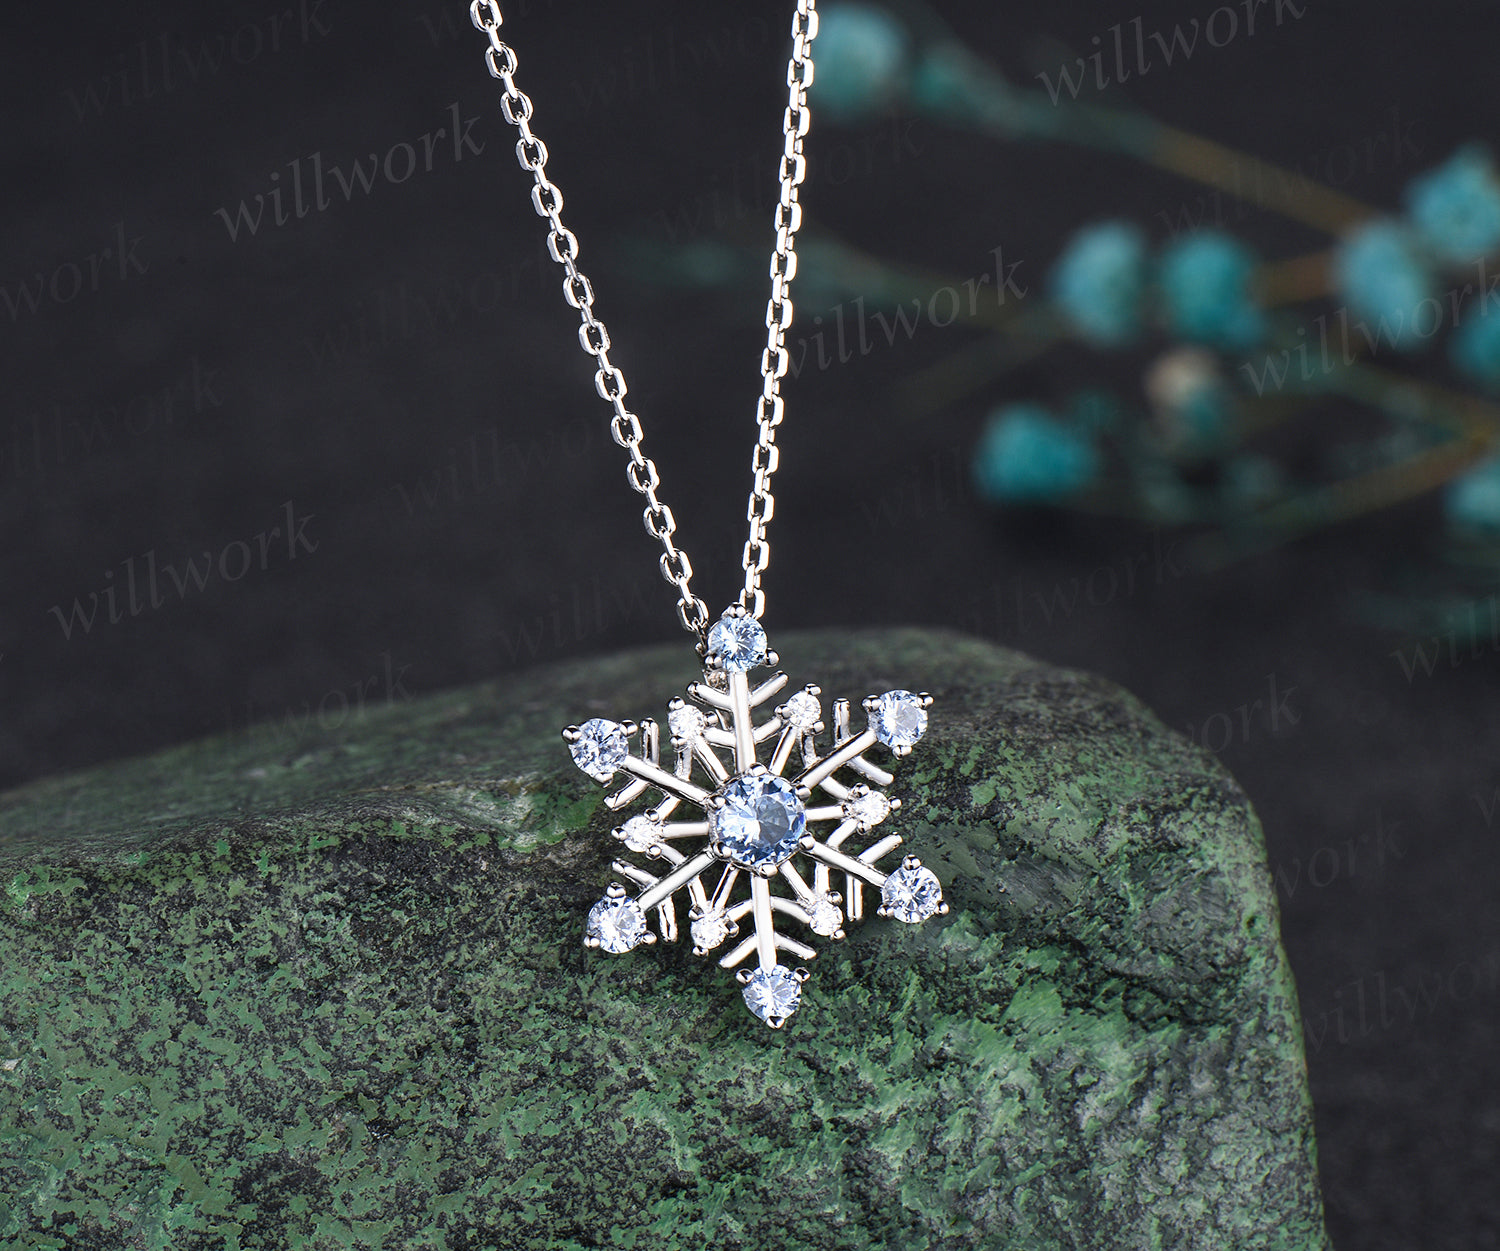 Buy Round White Diamond Crystal Snowflake Pendant with 18 inch Silver Chain  for Women (0.32 ctw, Color I-J, Clarity I2-I3) in 925 Sterling Silver  Online at Dazzling Rock